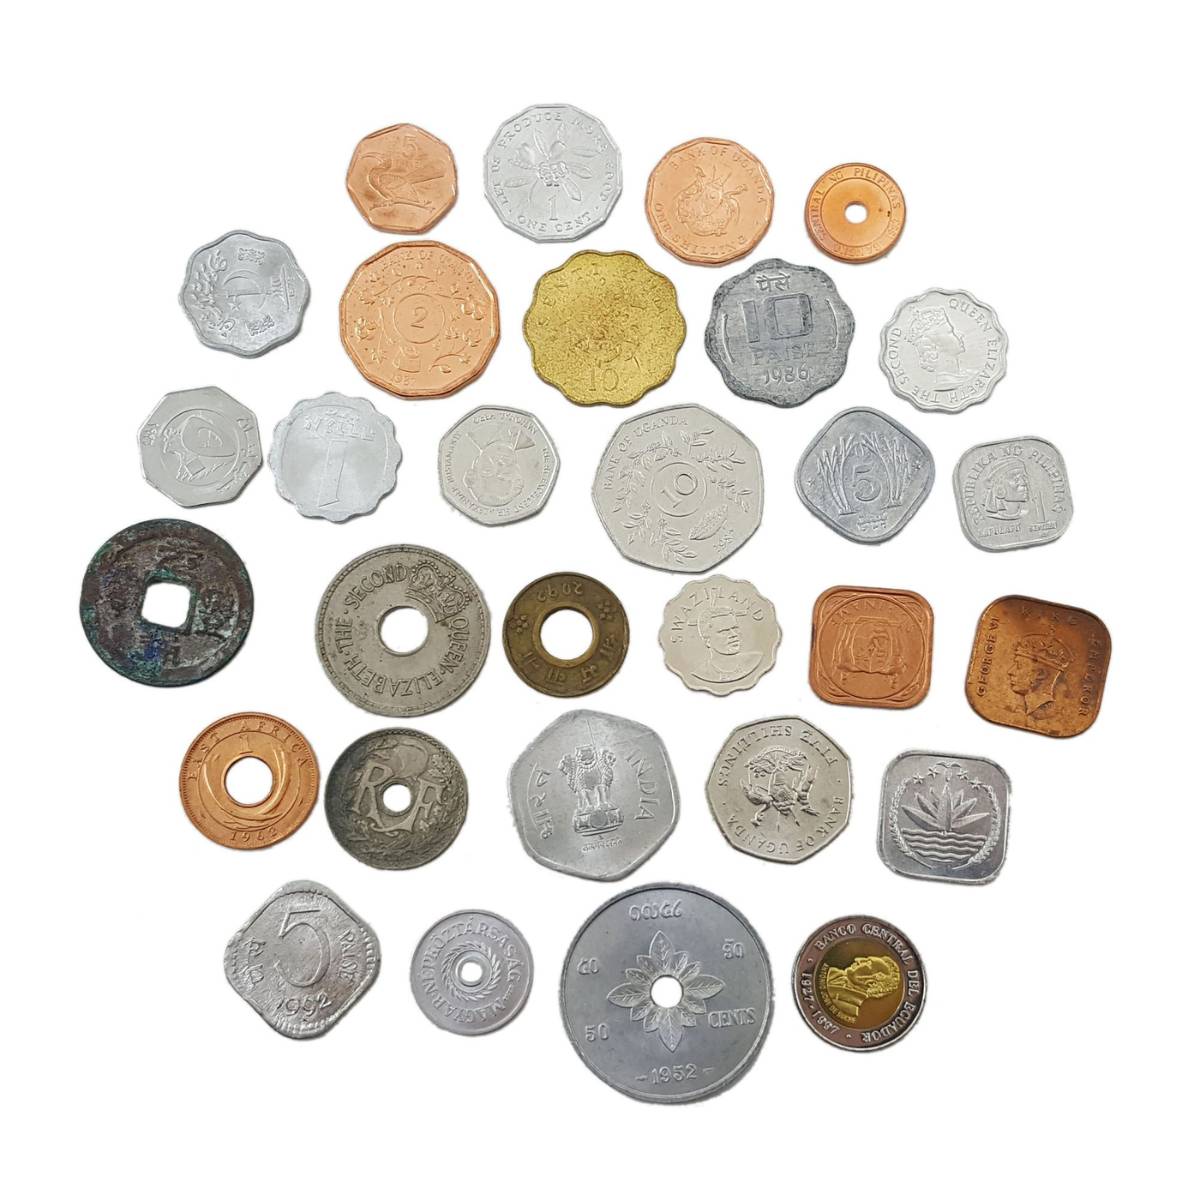 Odd-Shaped Coins from Around the World 30-Coin Set